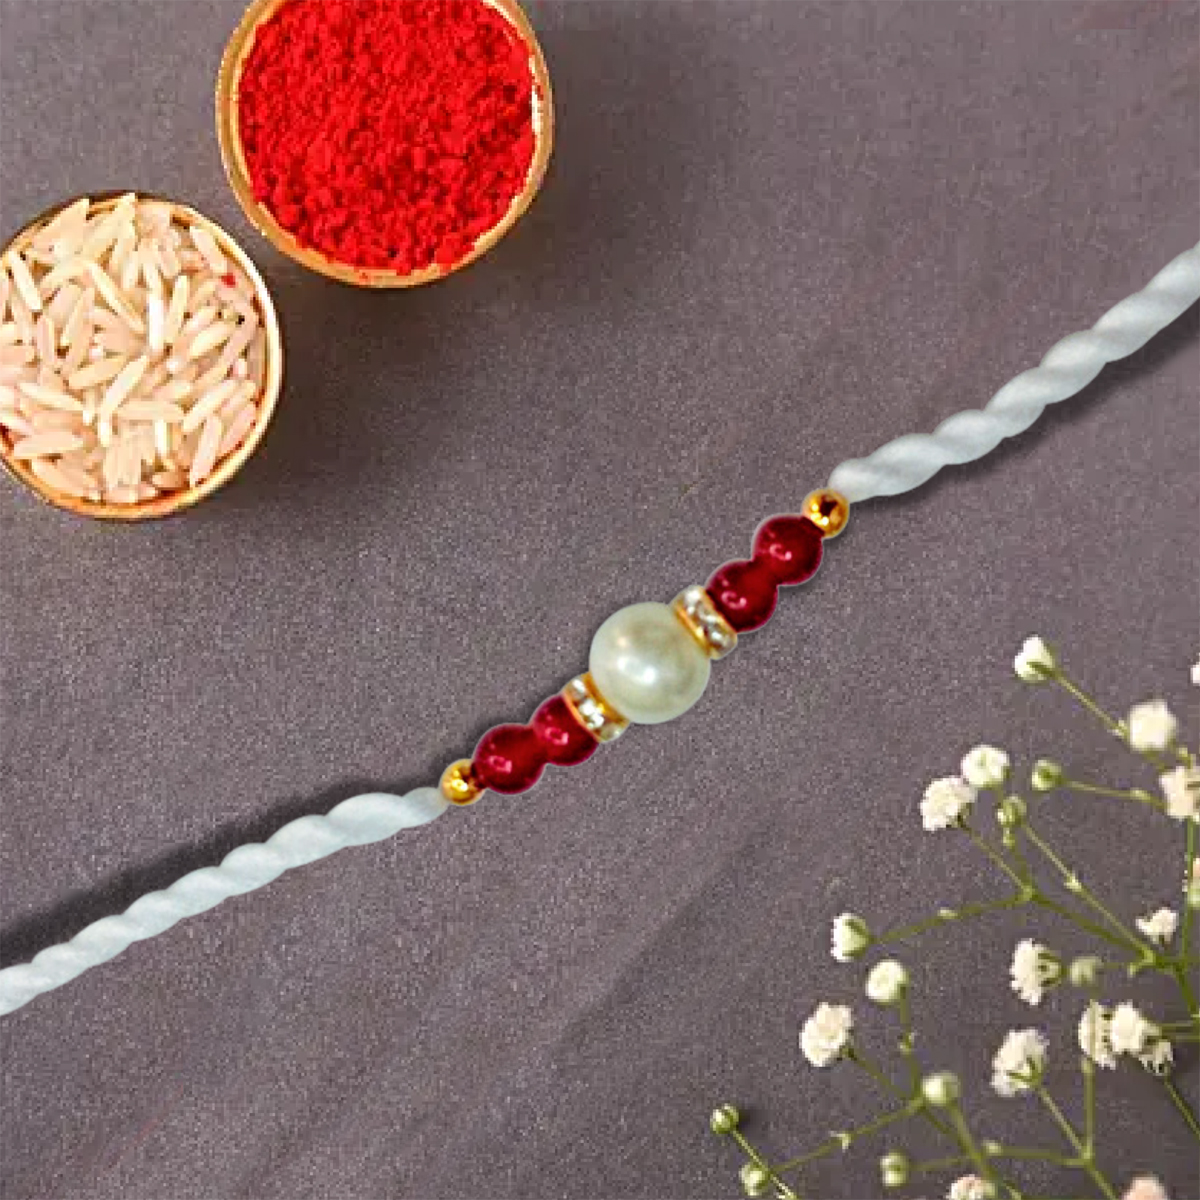 White Shell Pearl & Red Coloured Stone Rakhi for Brothers (SNSH4+SNSH2)